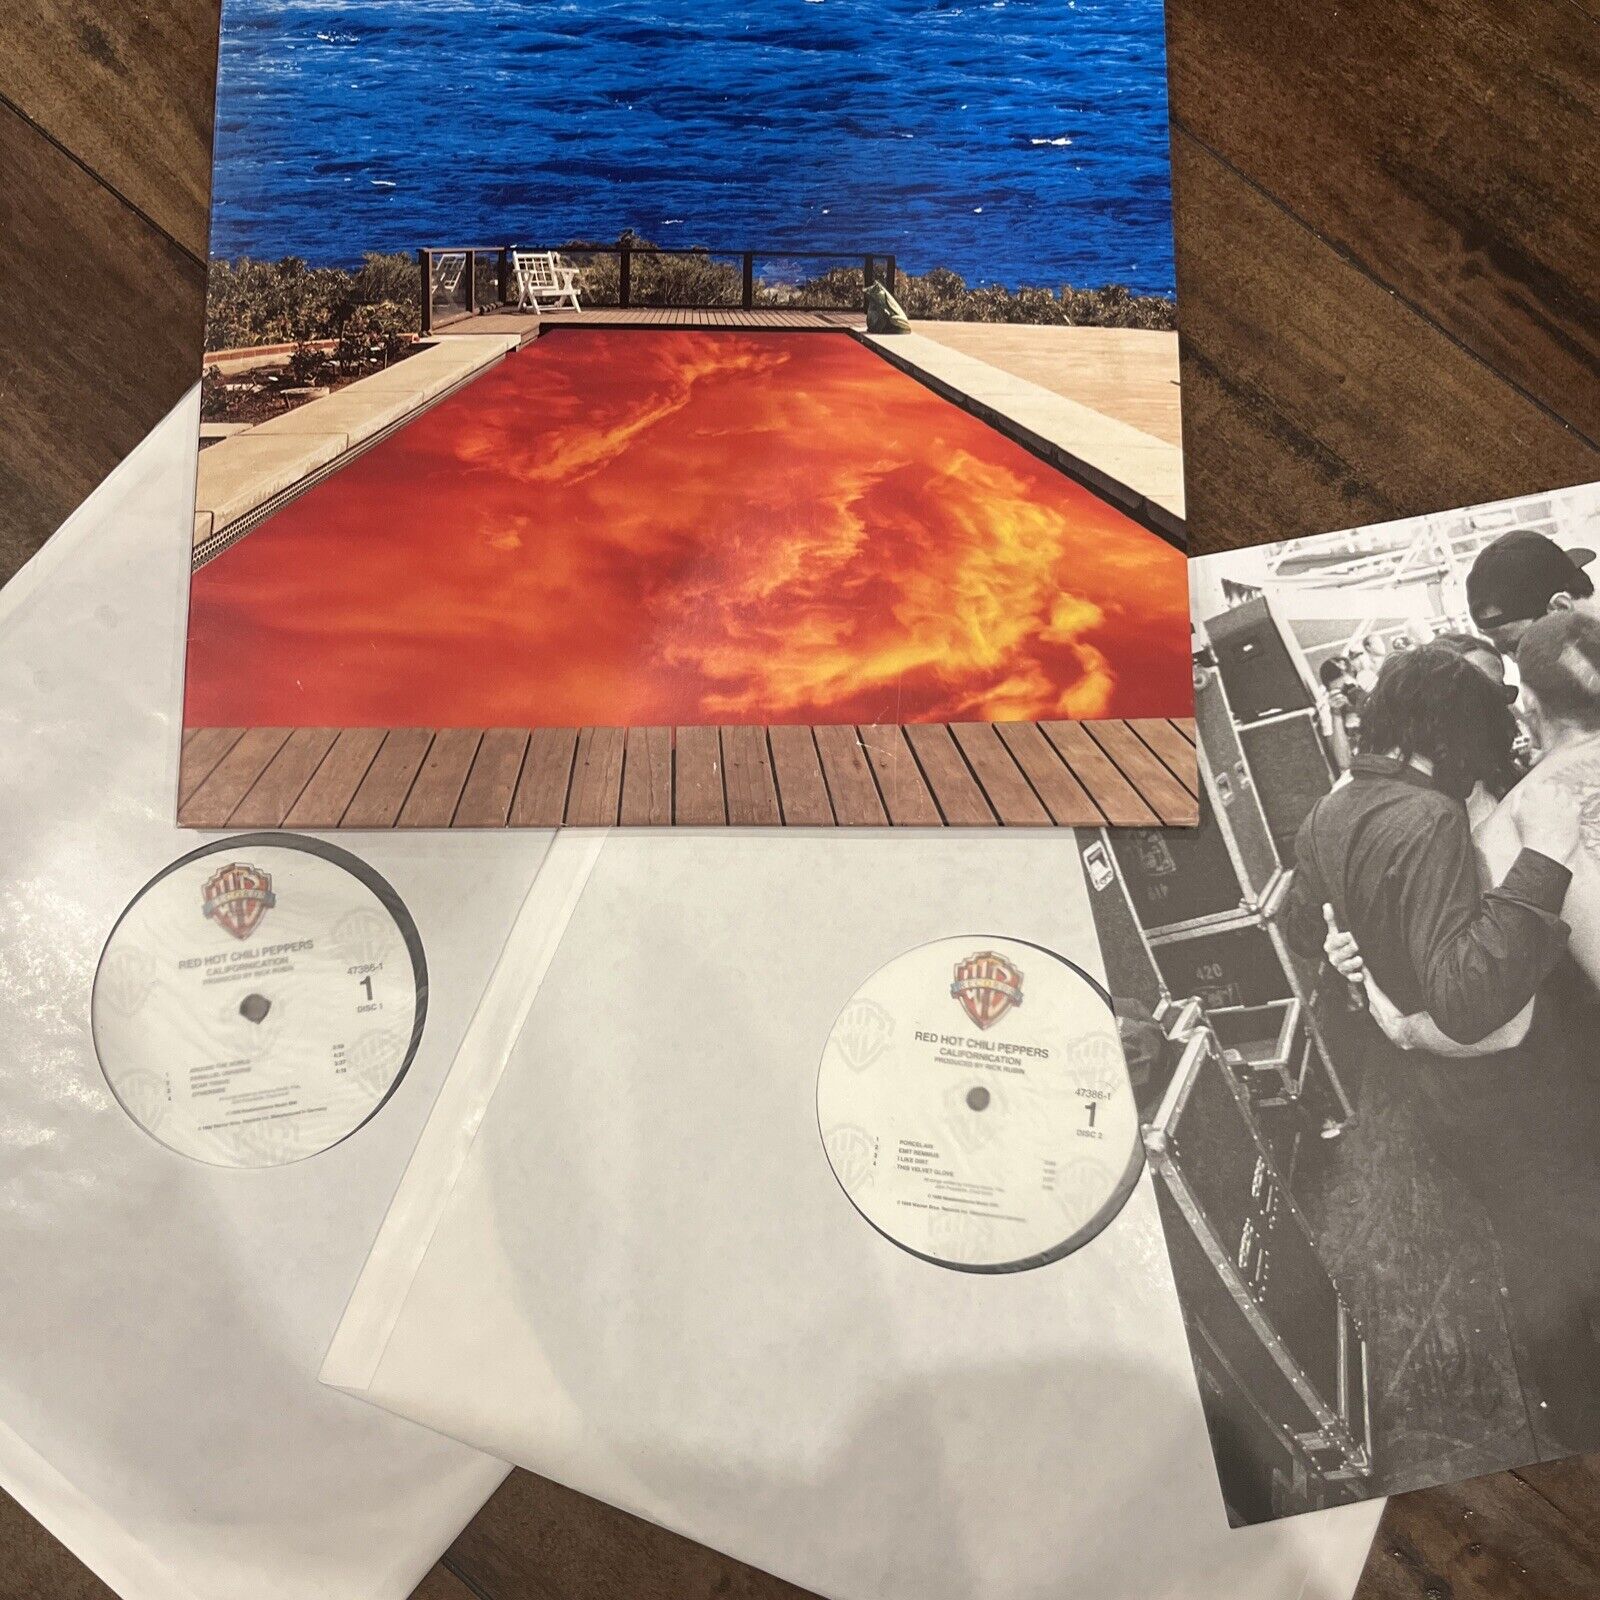 Californication [LP] by Red Hot Chili Peppers (Vinyl, Jun-1999, 2 Discs,...